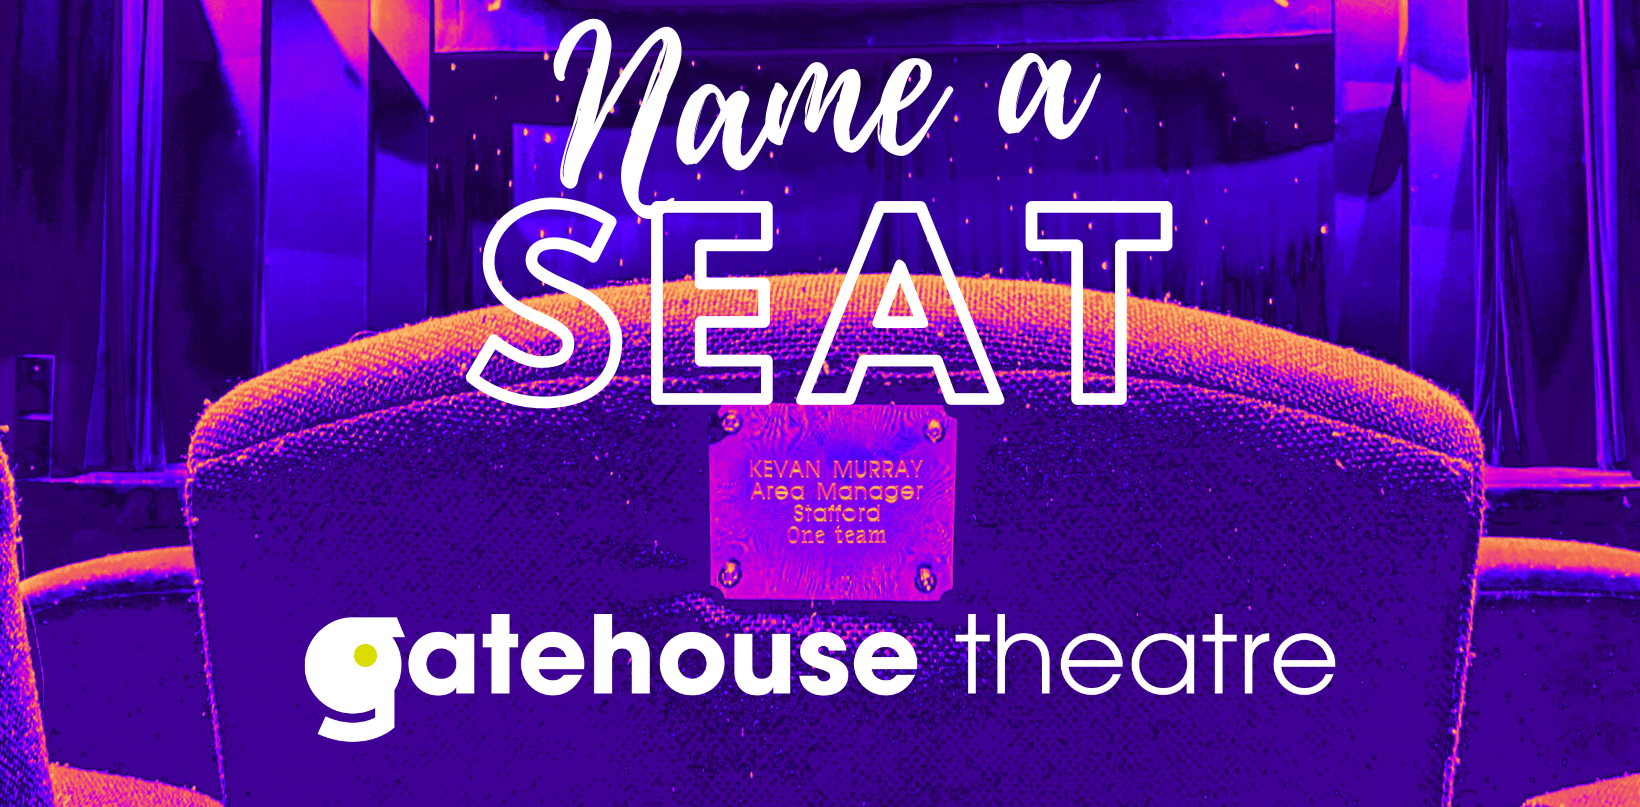 NEW: Name a Seat